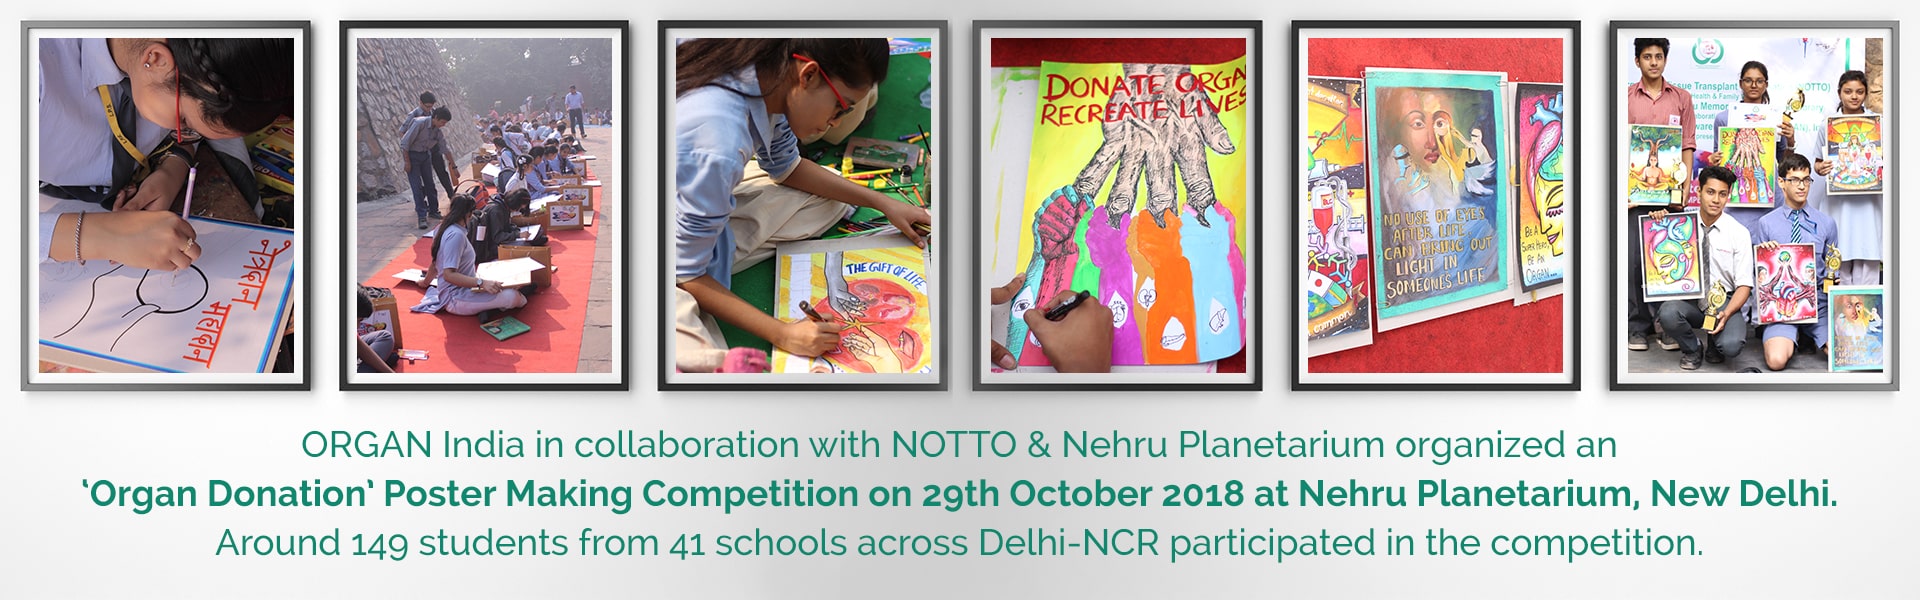 ORGAN India organized an Organ donation poster making competition